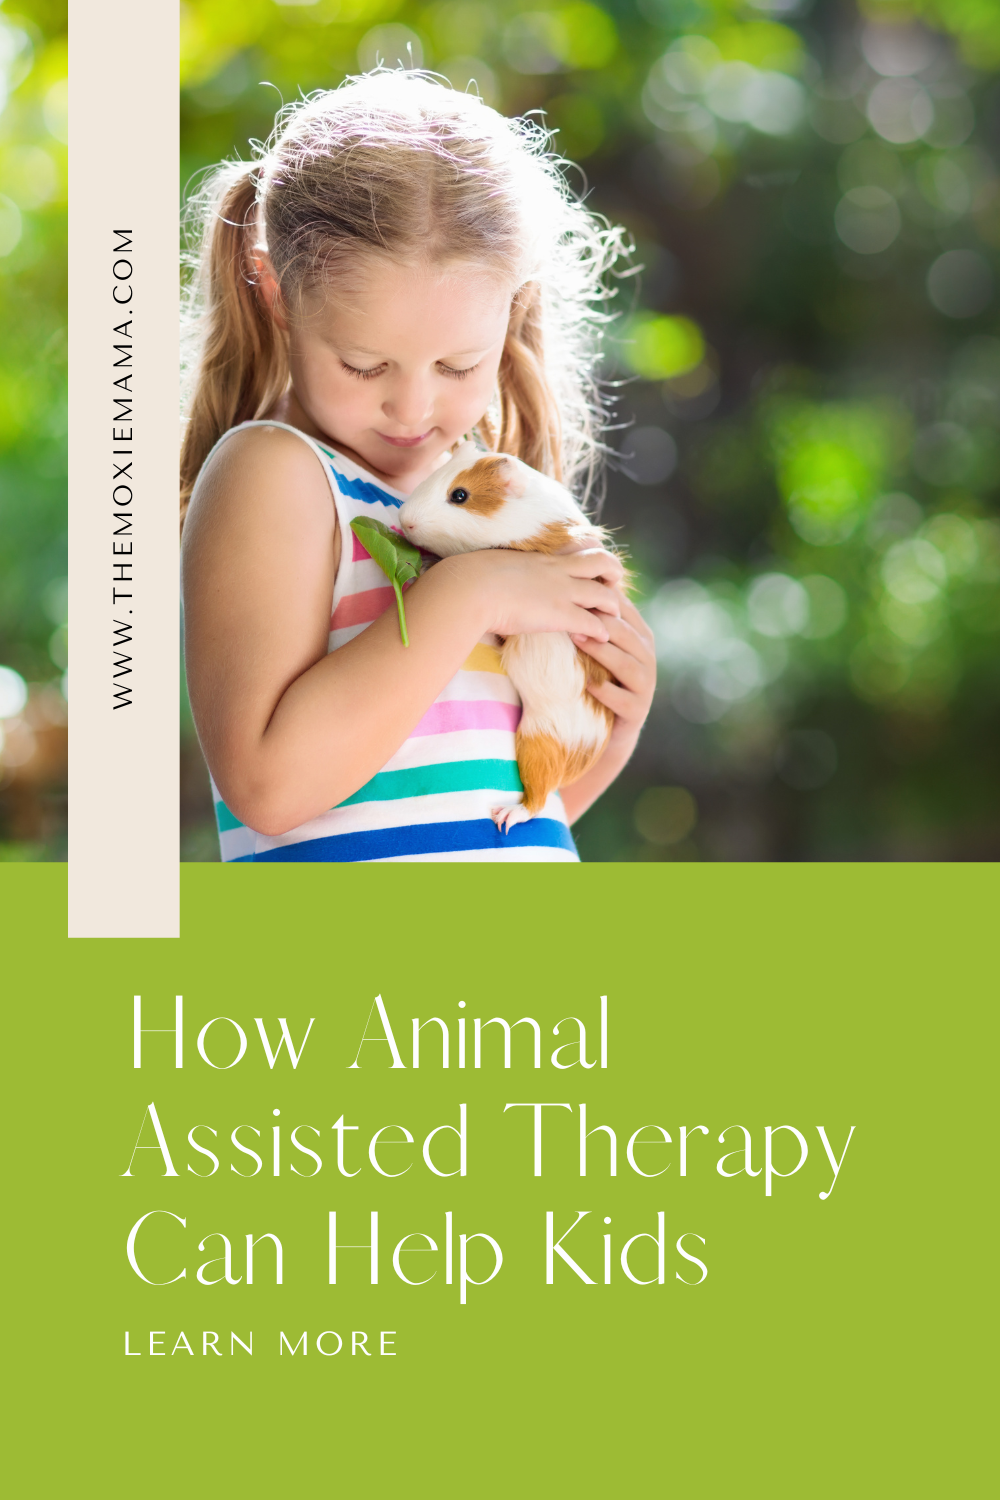 Animal-assisted therapy (AAT) can be a valuable form of therapy for children who are struggling with a range of emotional, social, or cognitive challenges.